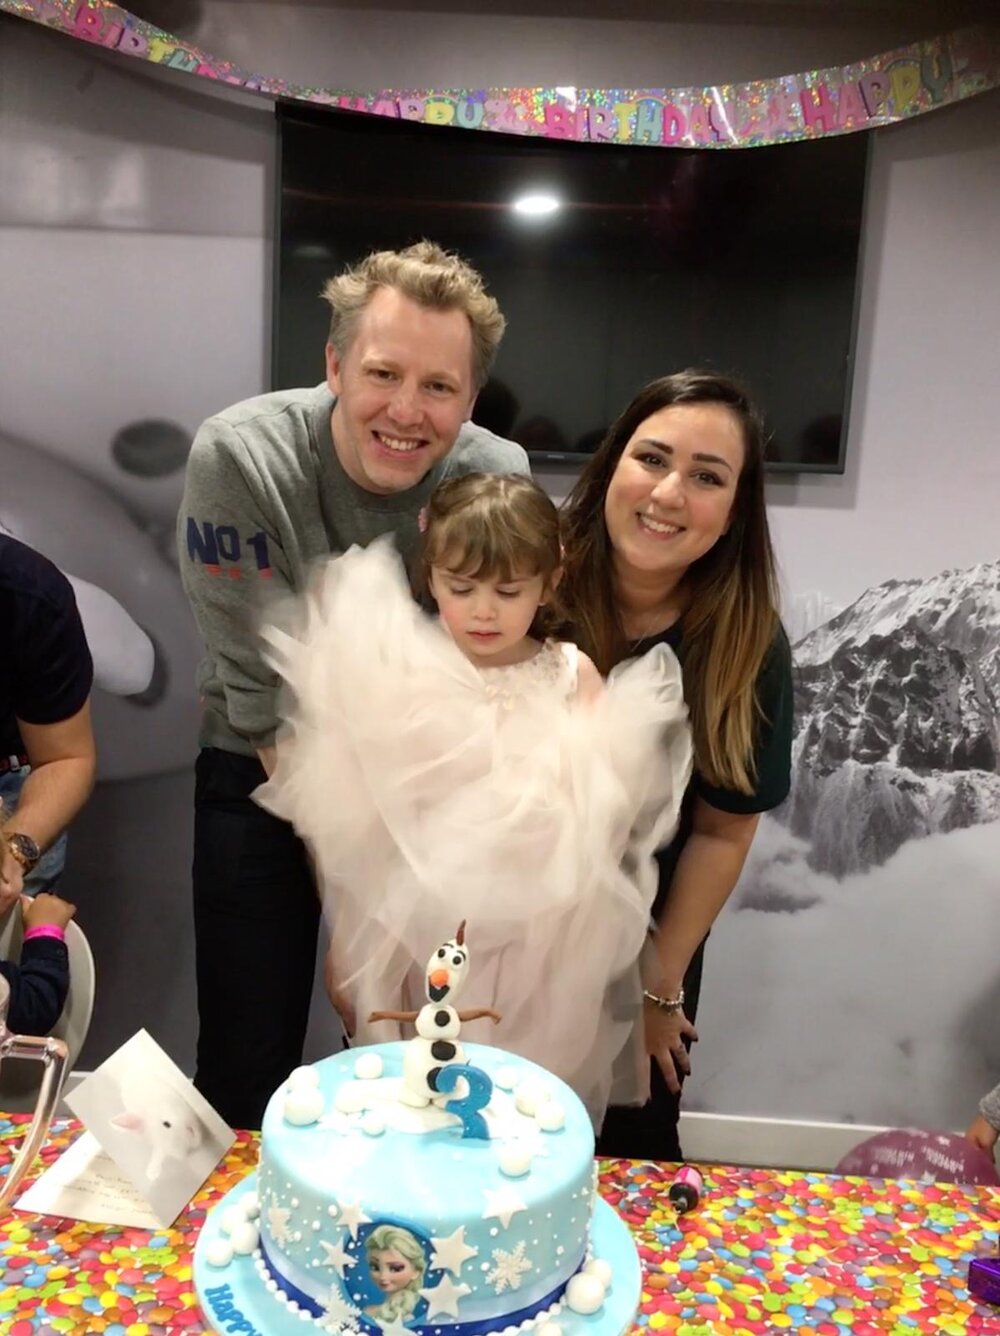 Celebrating Millie's 3rd birthday with a party and cake. Photo: Lacuna Voices